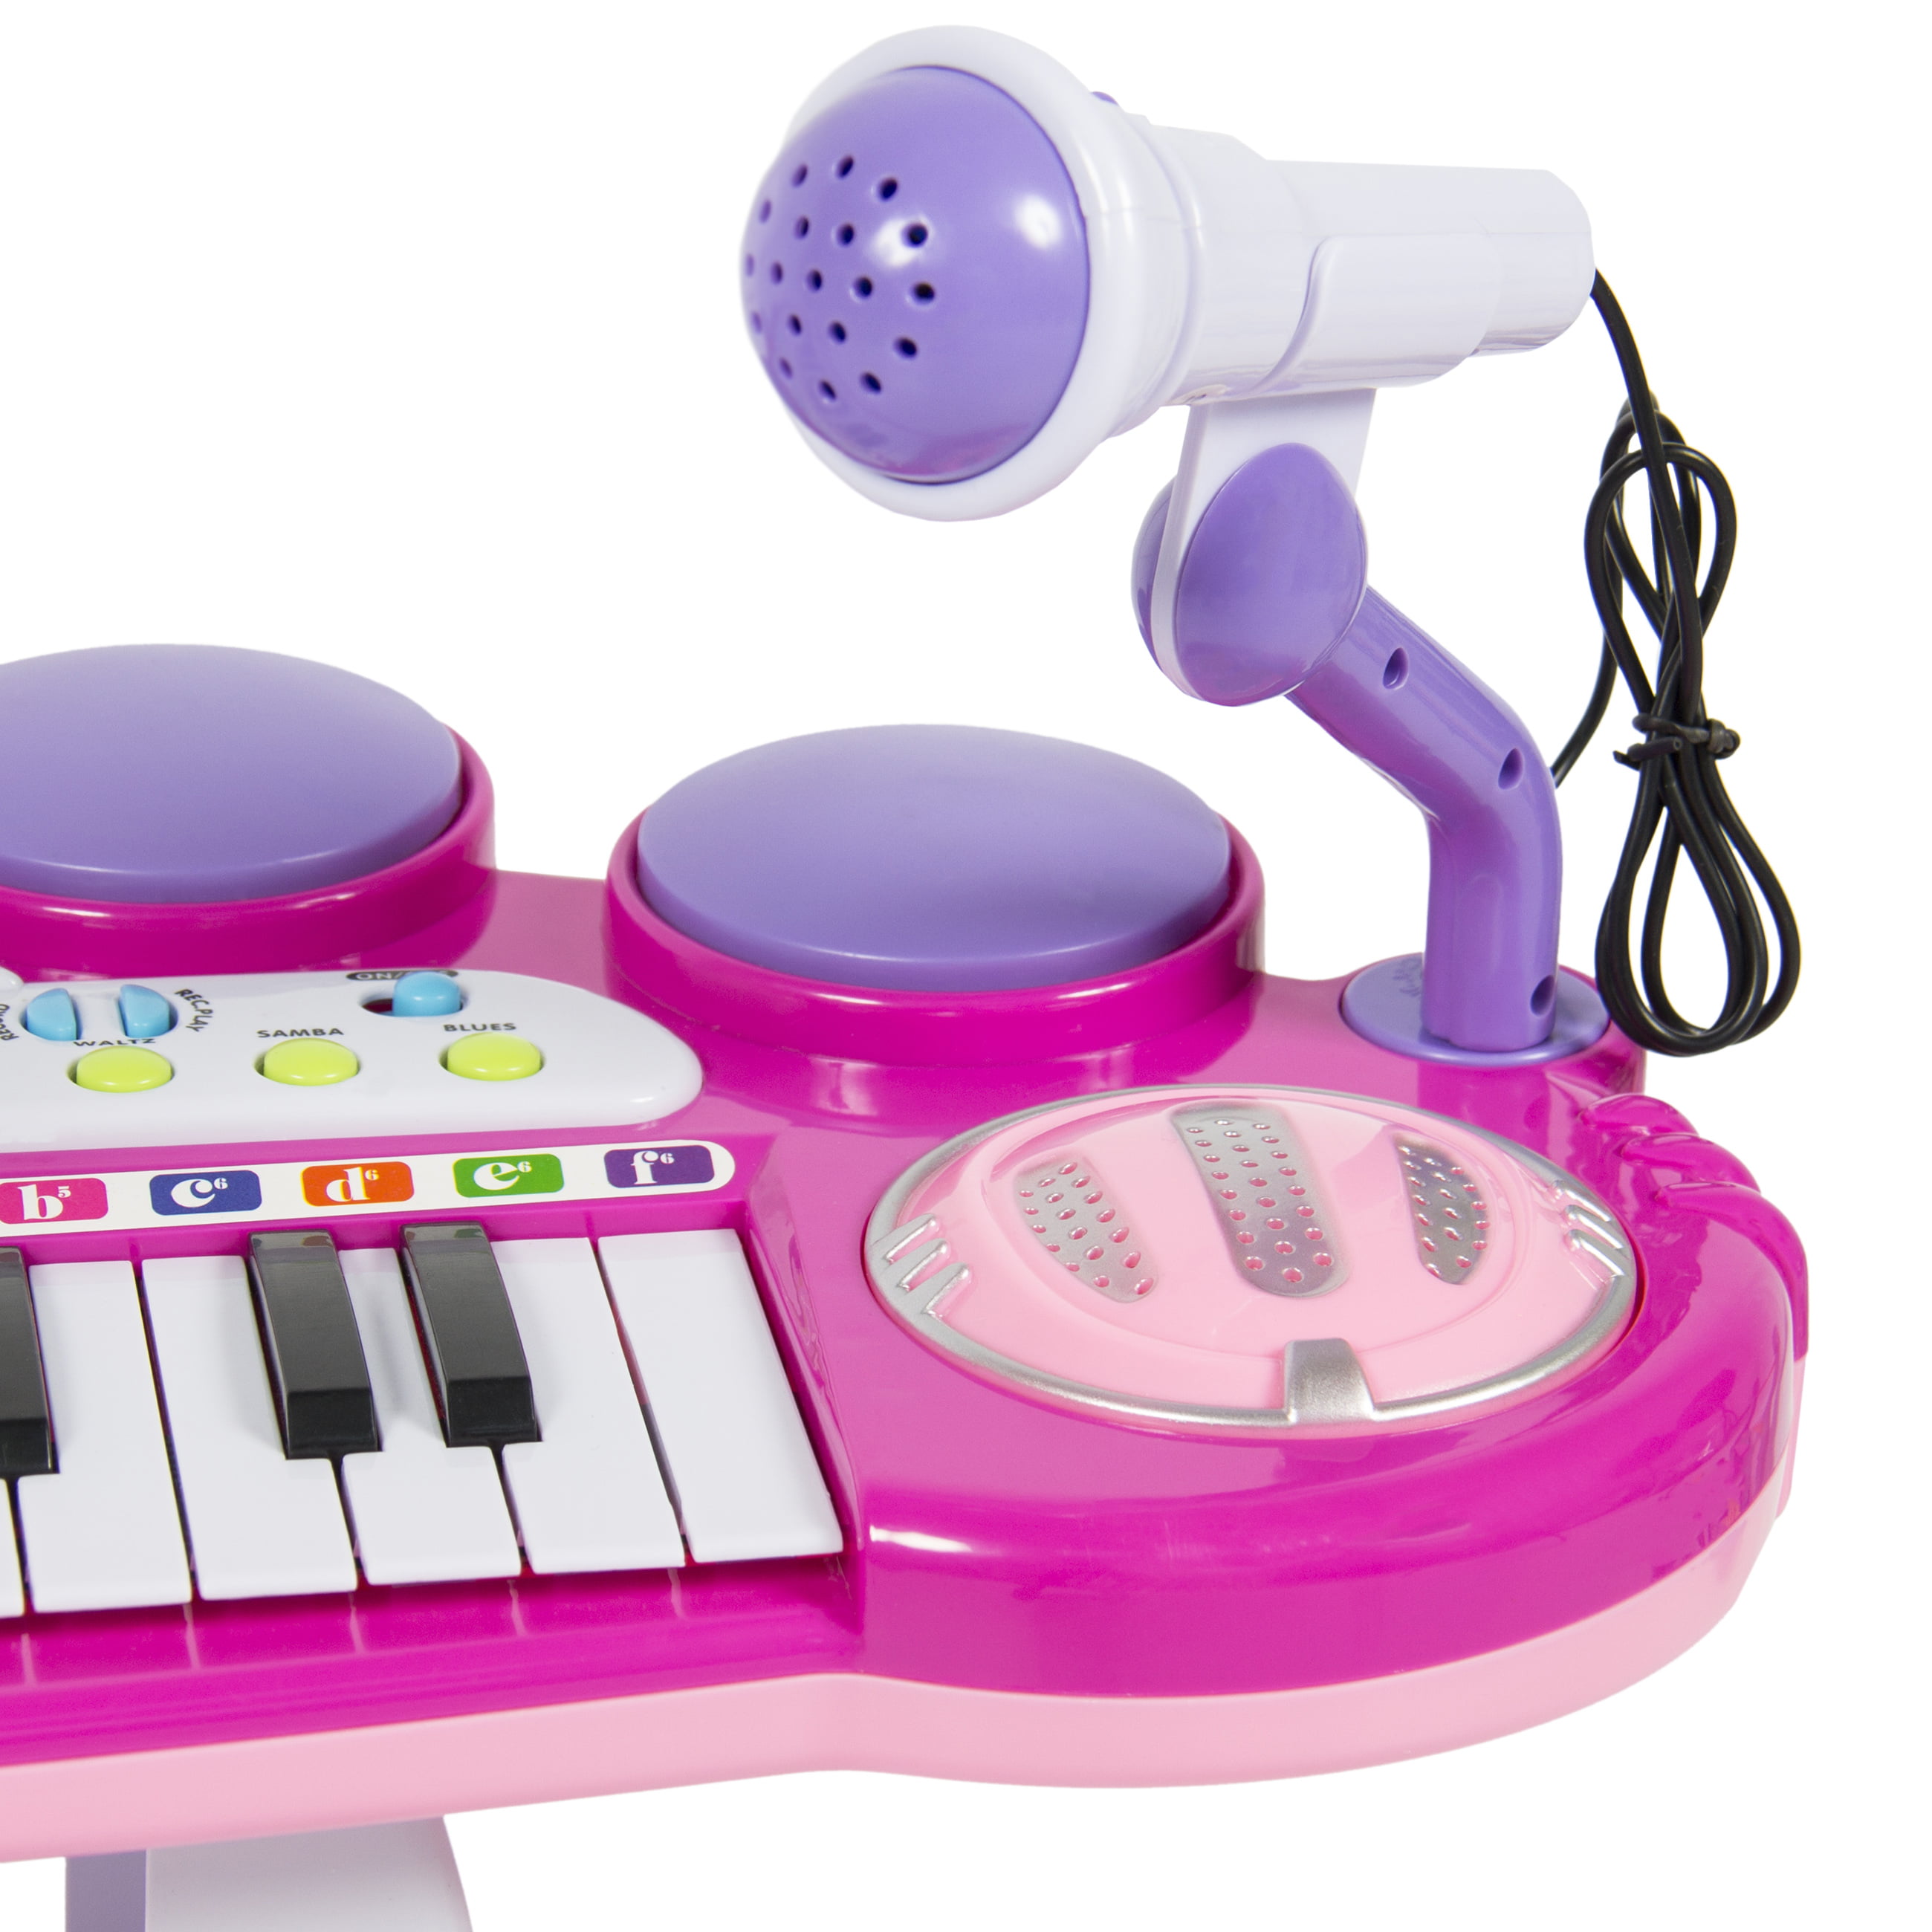 toddler piano with microphone